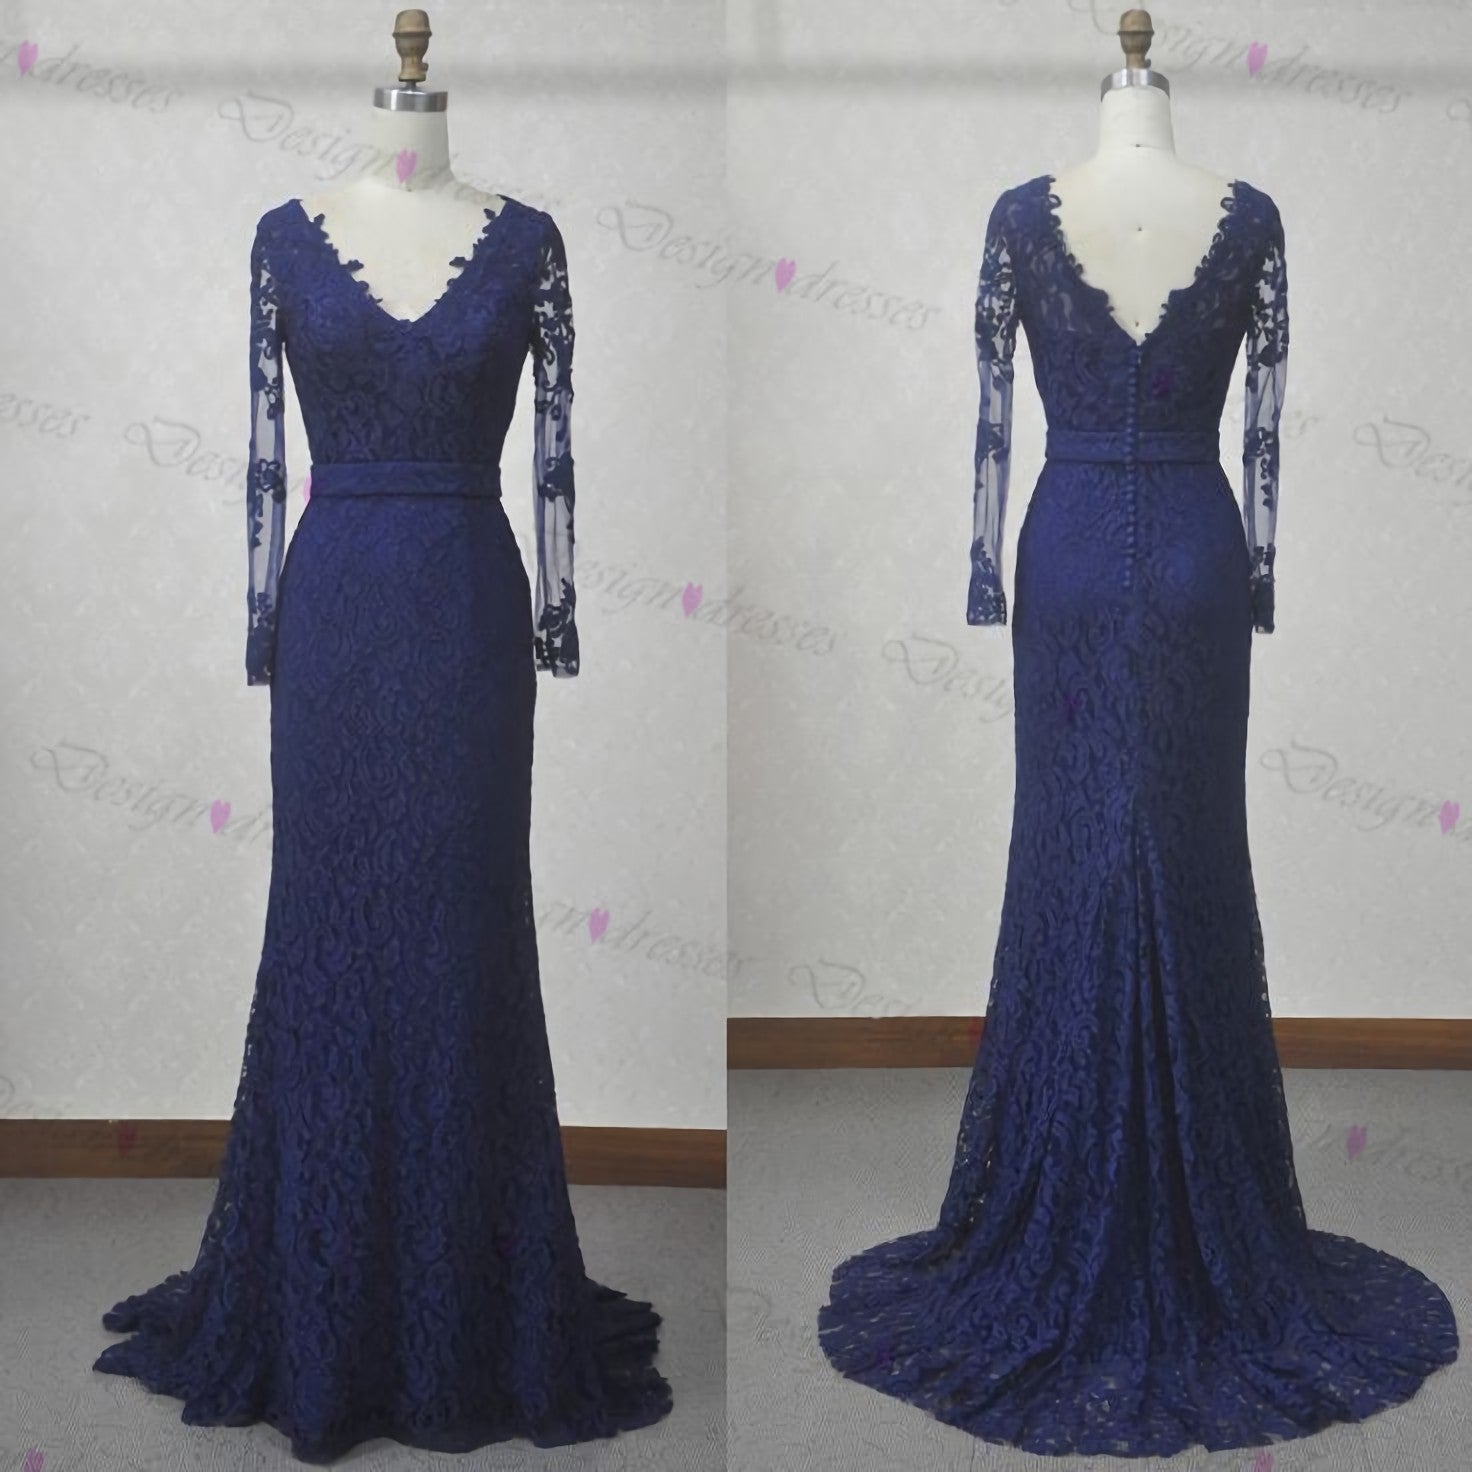 Party Dresses Online Shopping, Lace Prom Dress, Long Sleeve Prom Dress, V Neck Prom Dress, Sexy Prom Dresses, Prom Dresses, 2024 Cheap Prom Dresses, Long Prom Dress, Dress For Prom